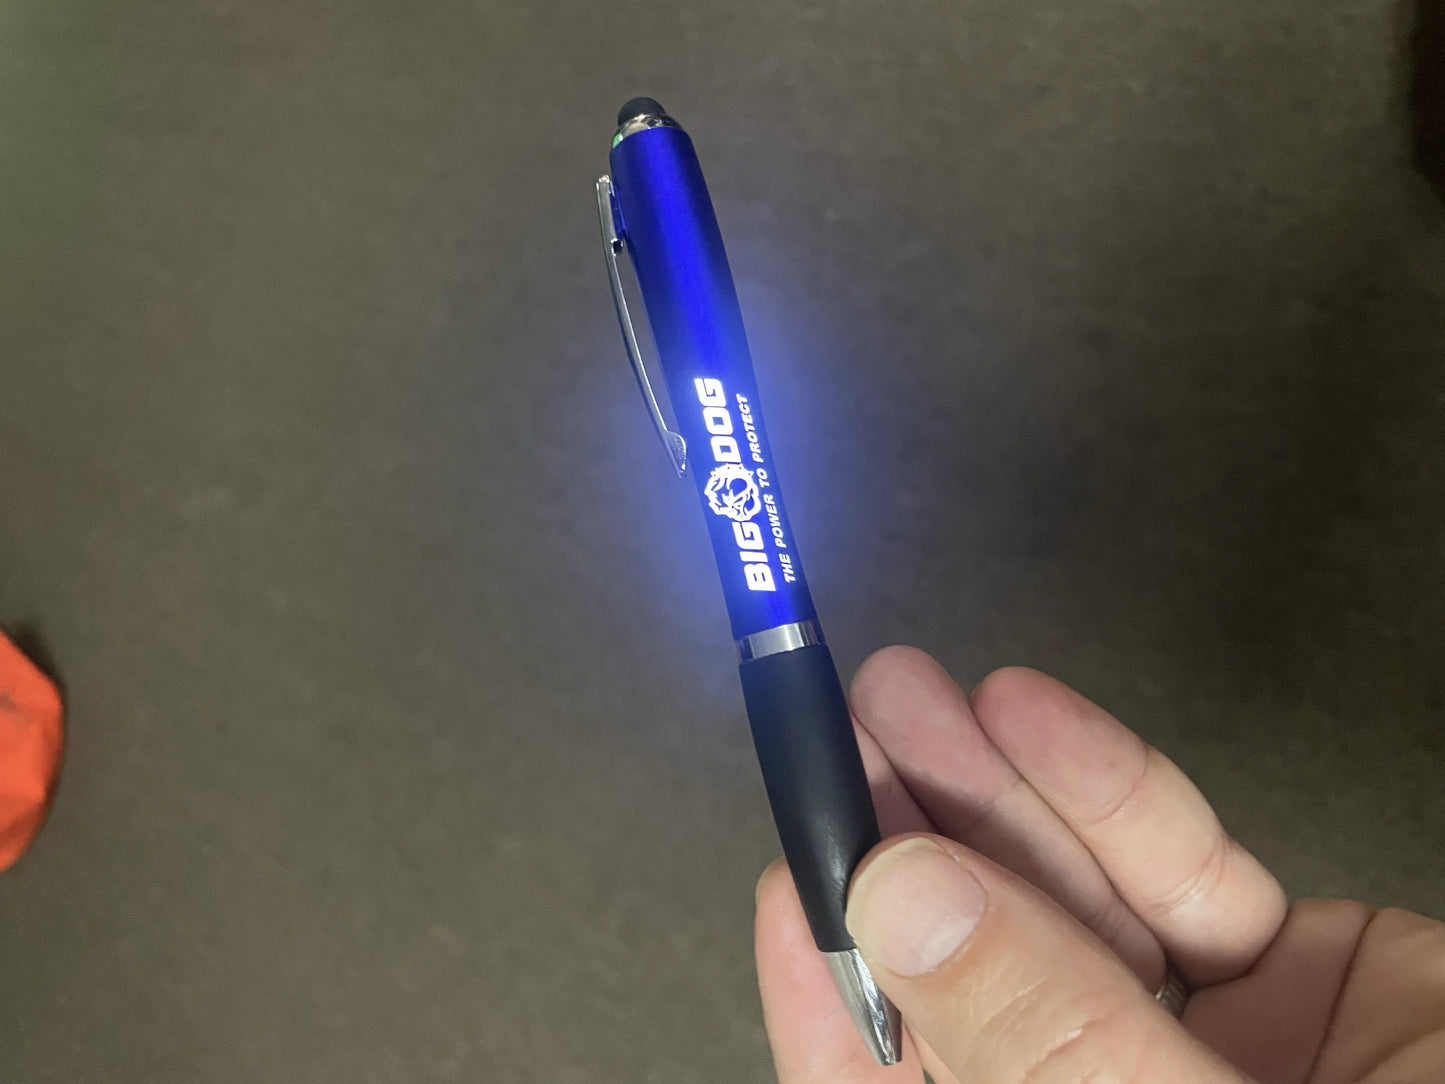 LED Light-Up Touch Screen Stylus Ballpoint Pen for Premium Promotional Gifts